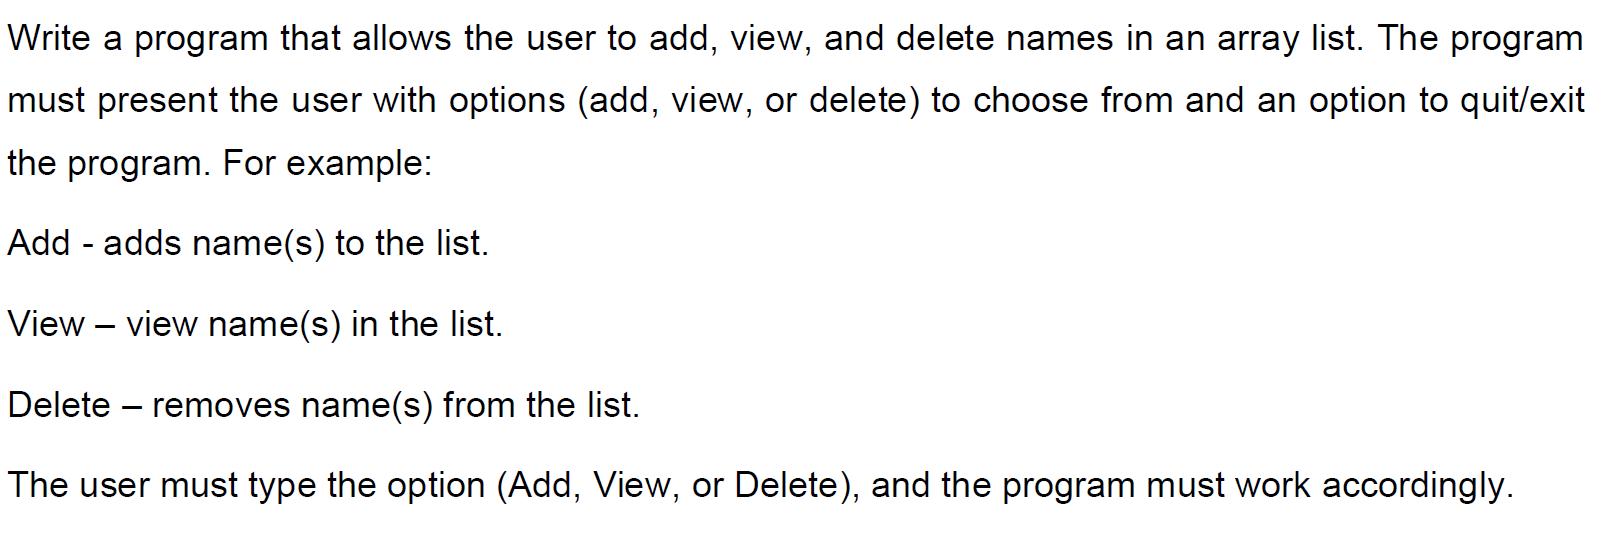 Write a program that allows the user to add, view, and delete names in an array list. The program must